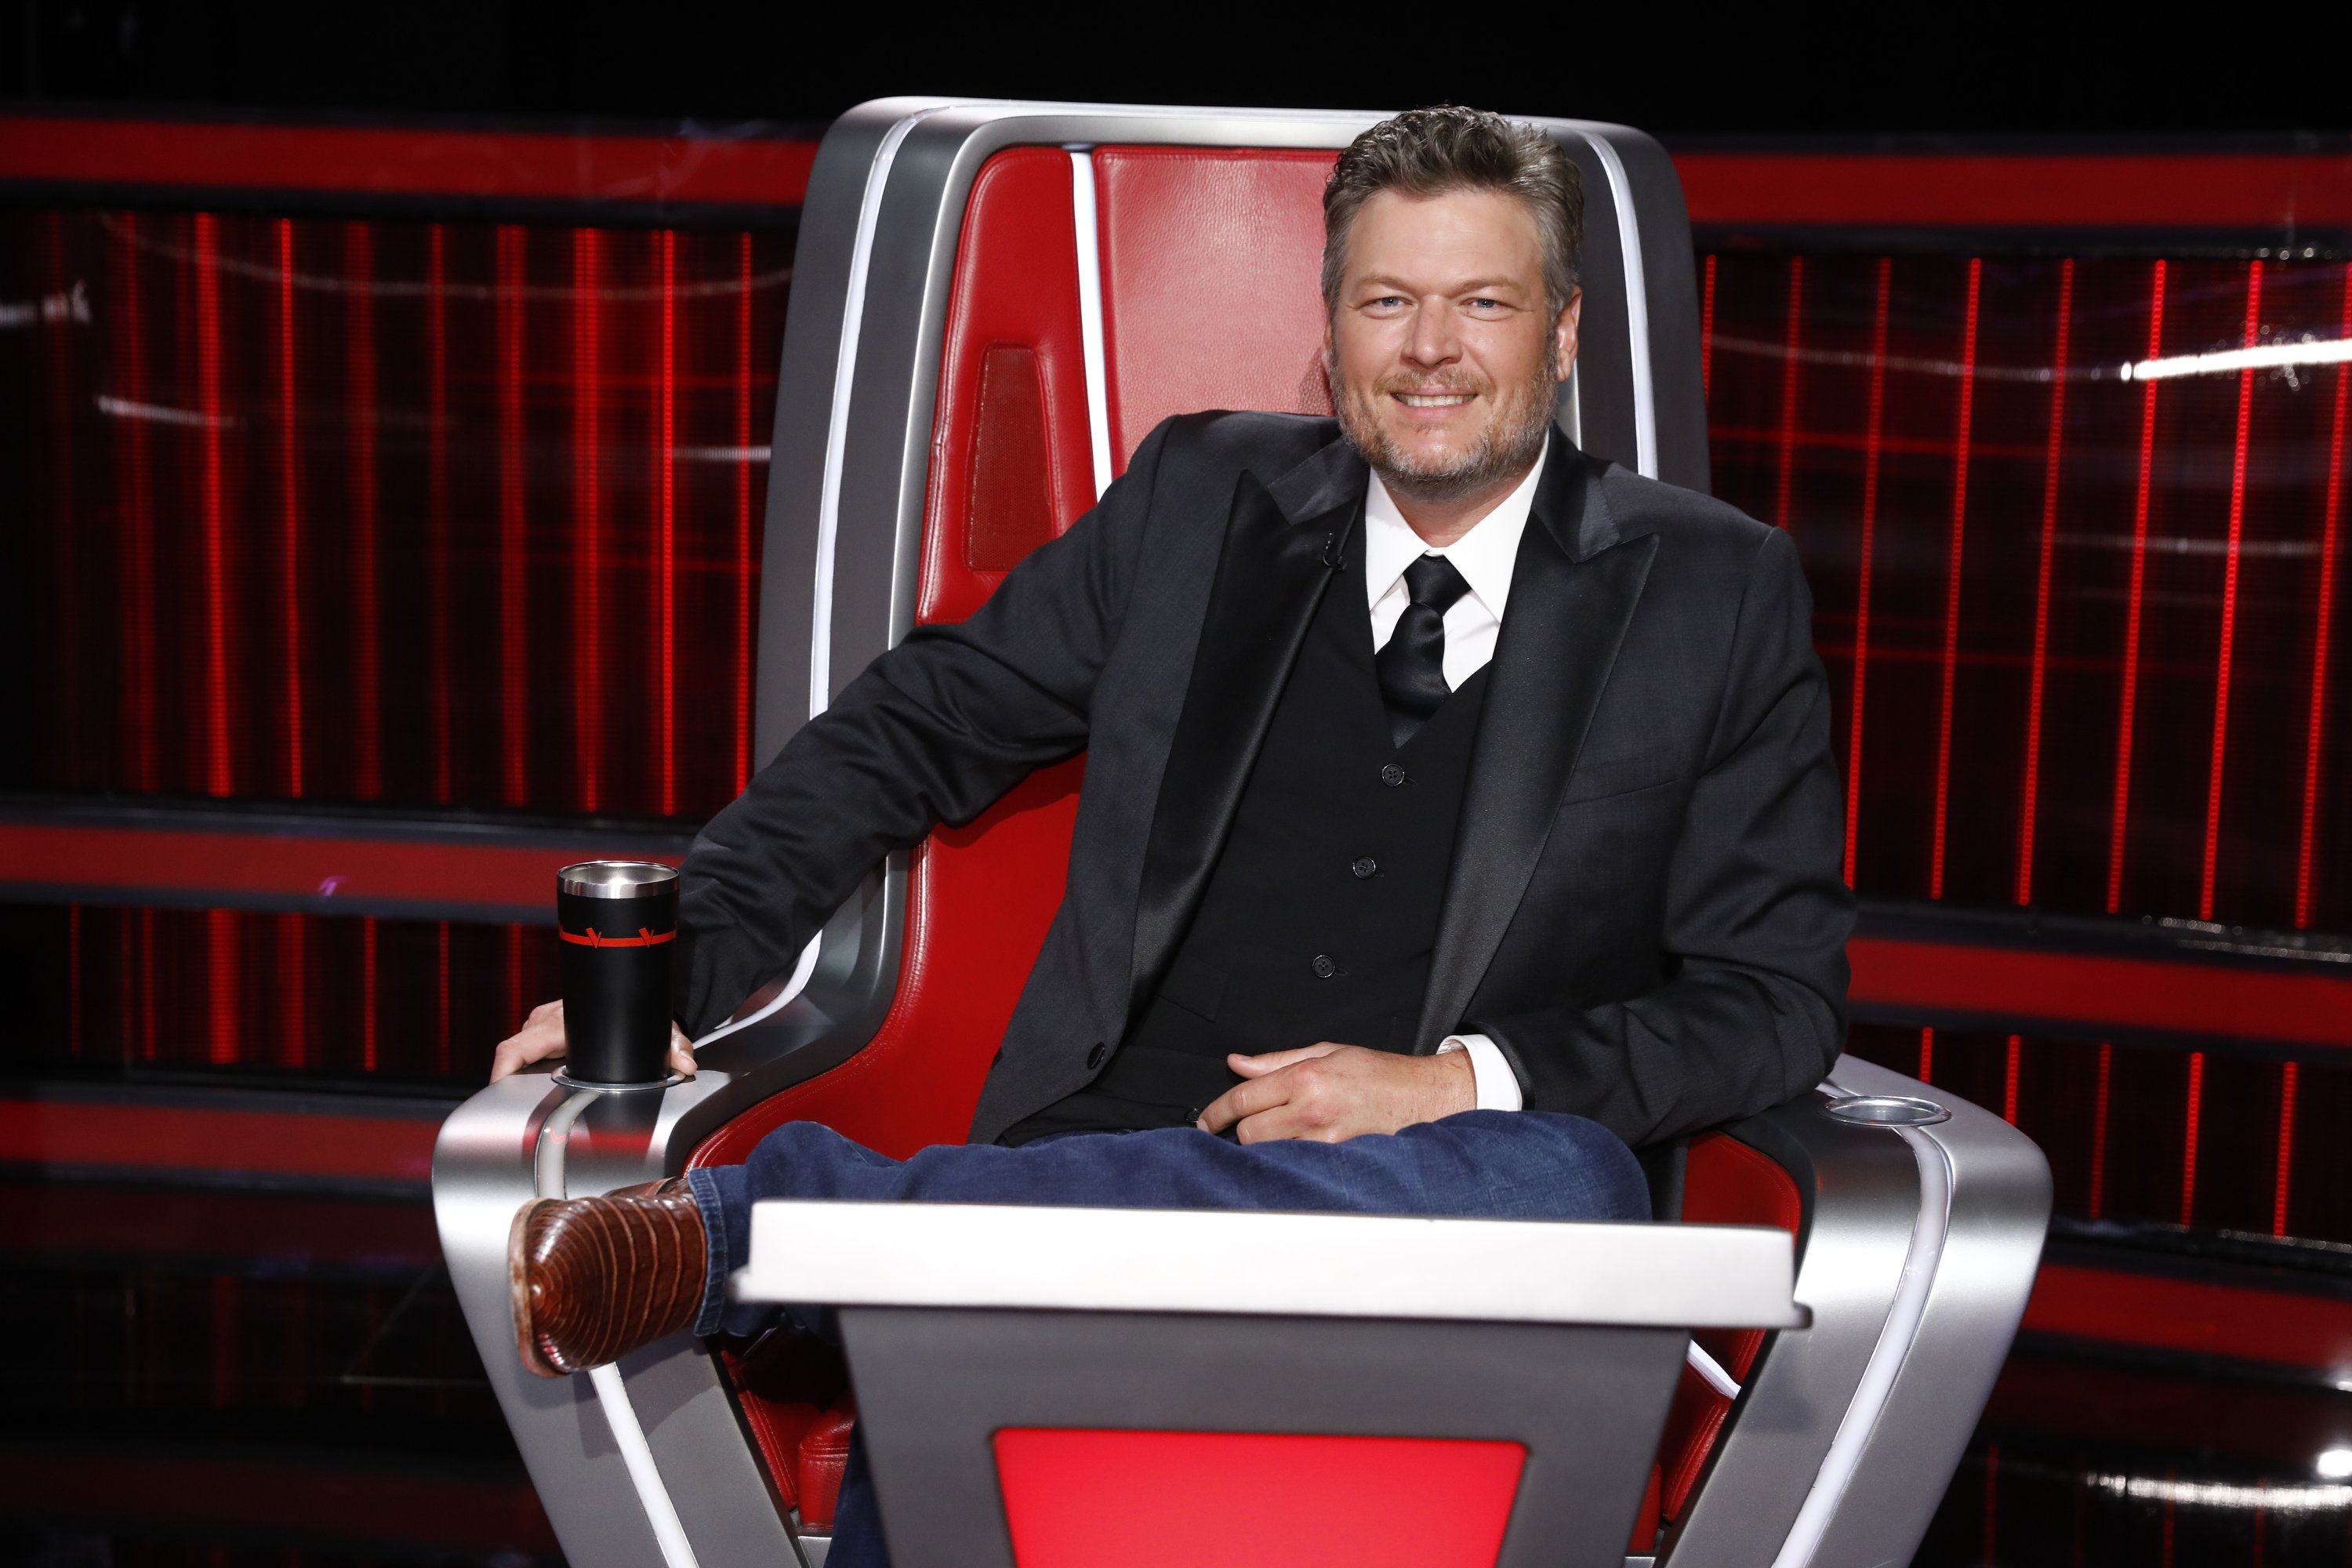 Blake Shelton on "The Voice," 2021 | Source: Getty Images